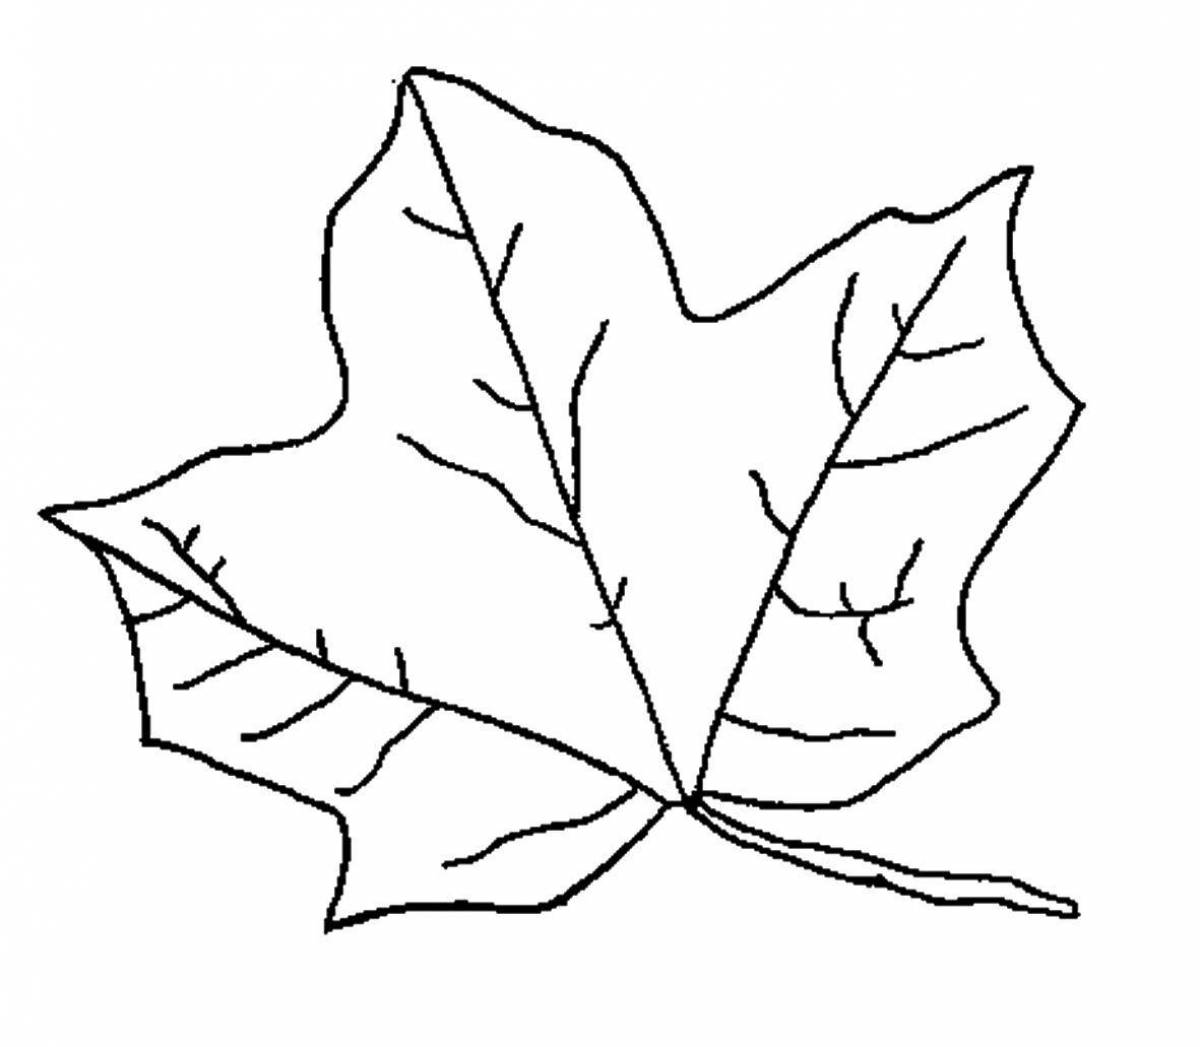 Exquisite leaves coloring book for kids